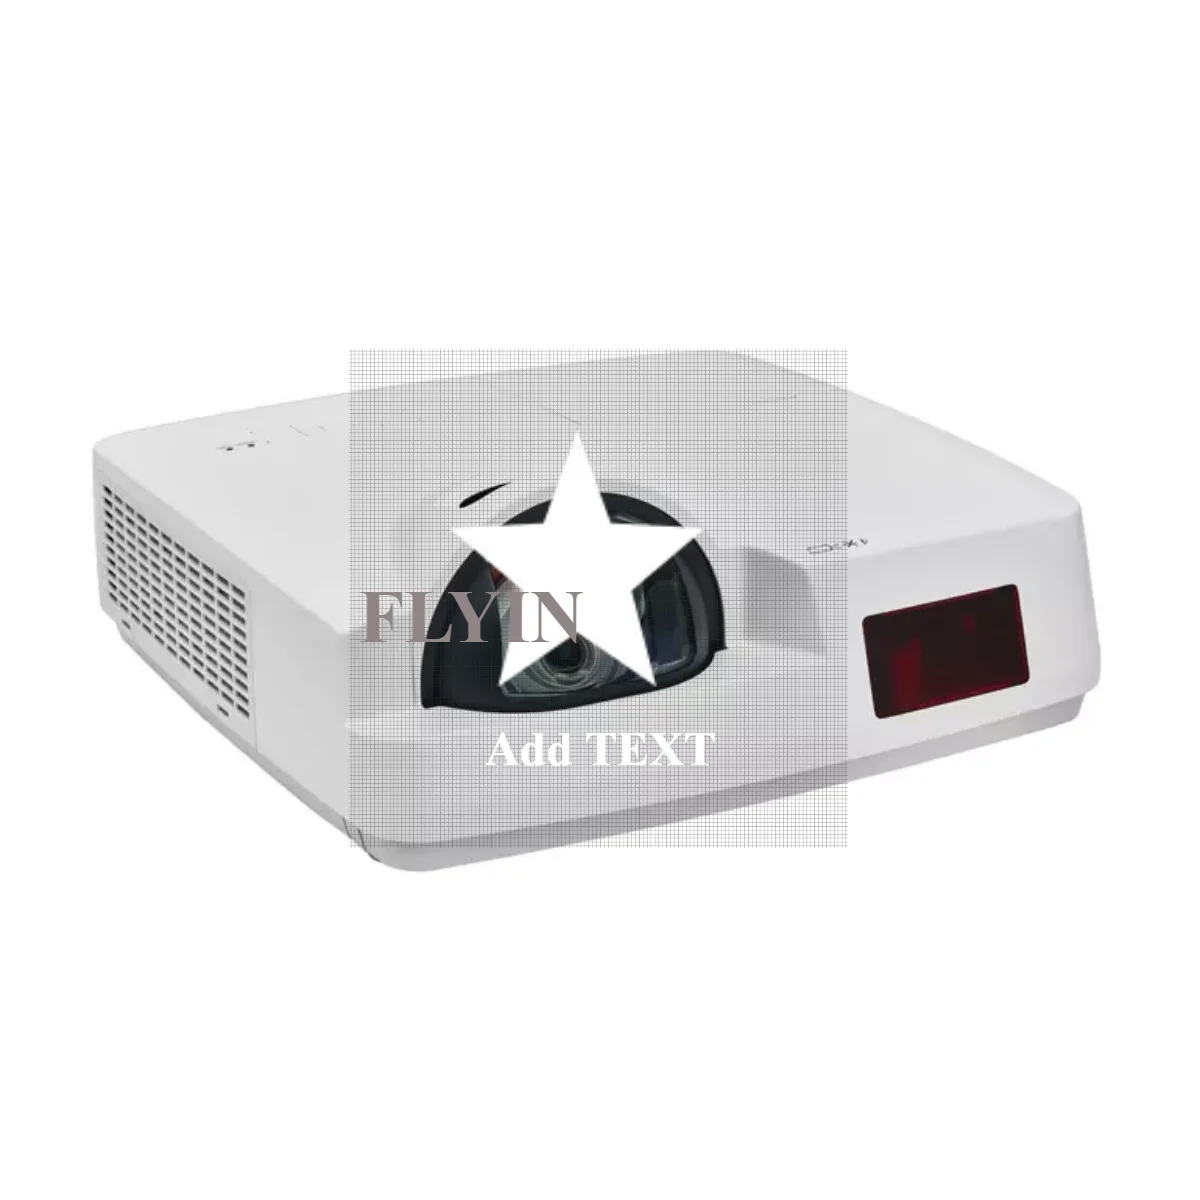 

Conference School Use 3700 ansi Lumens 3LCD 1080P XGA Ultra Short throw Projector Education School Use Proyector